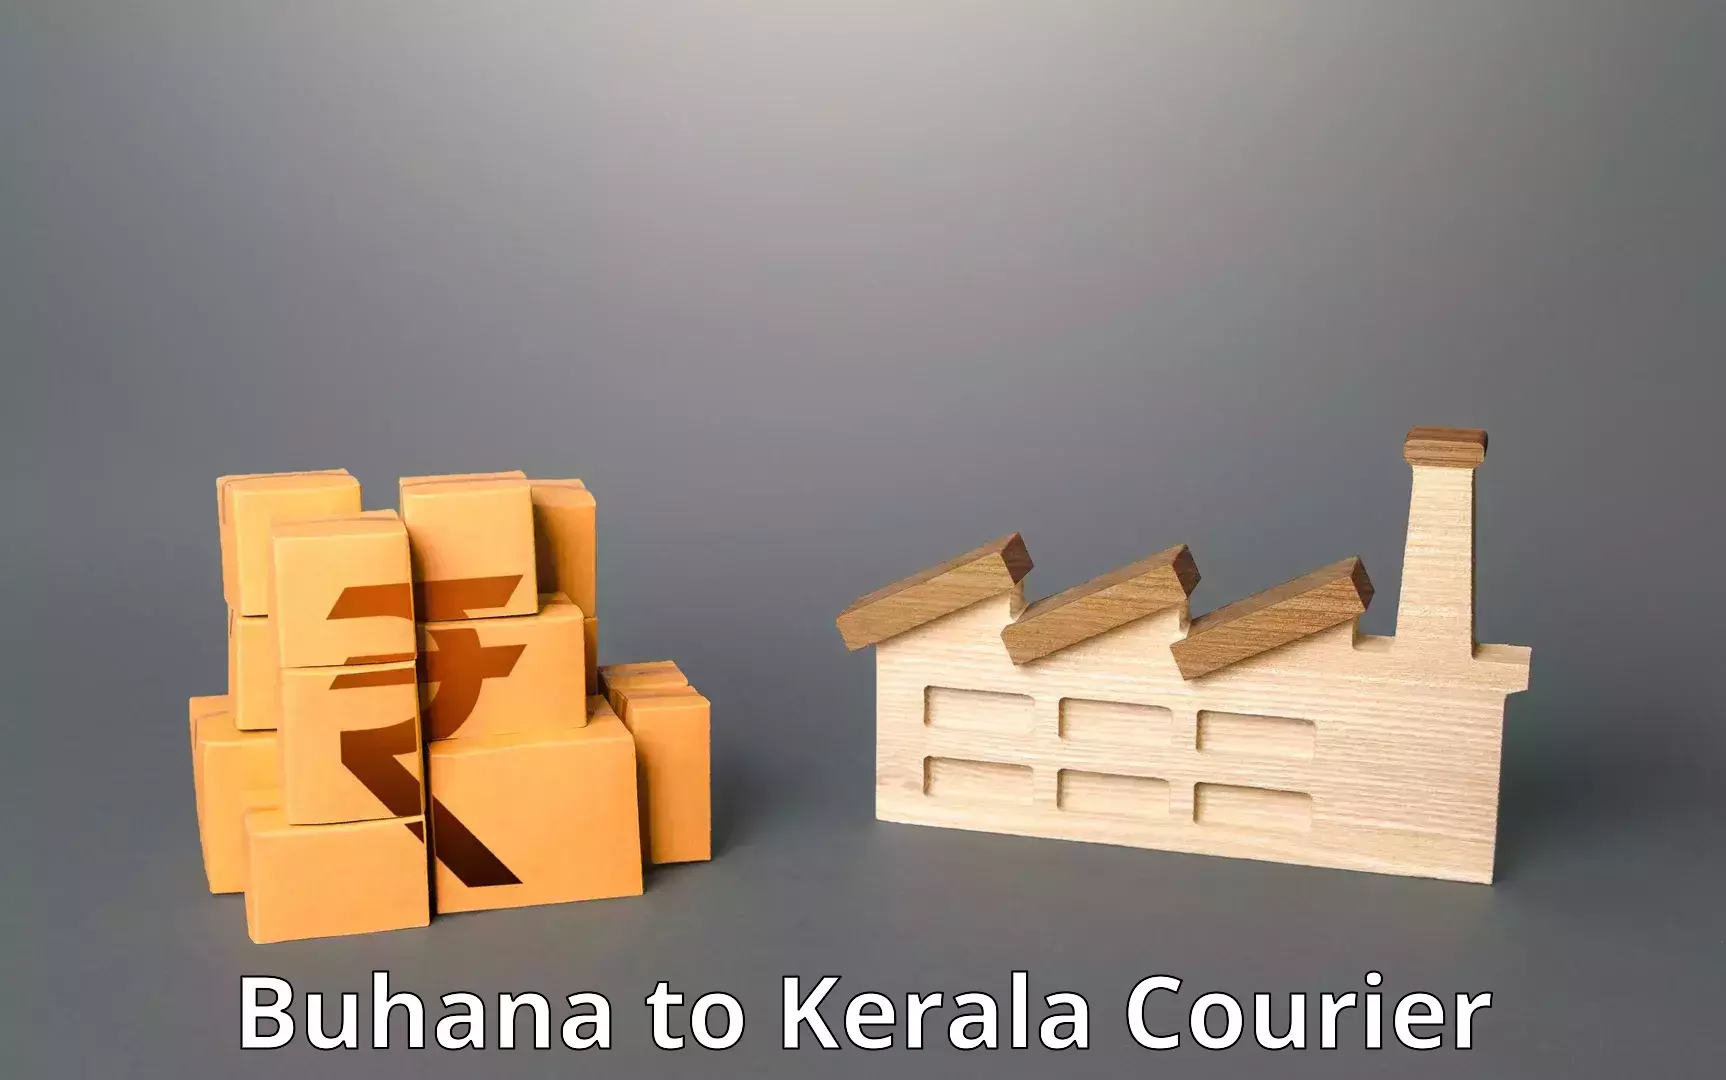 Express delivery network Buhana to Kerala